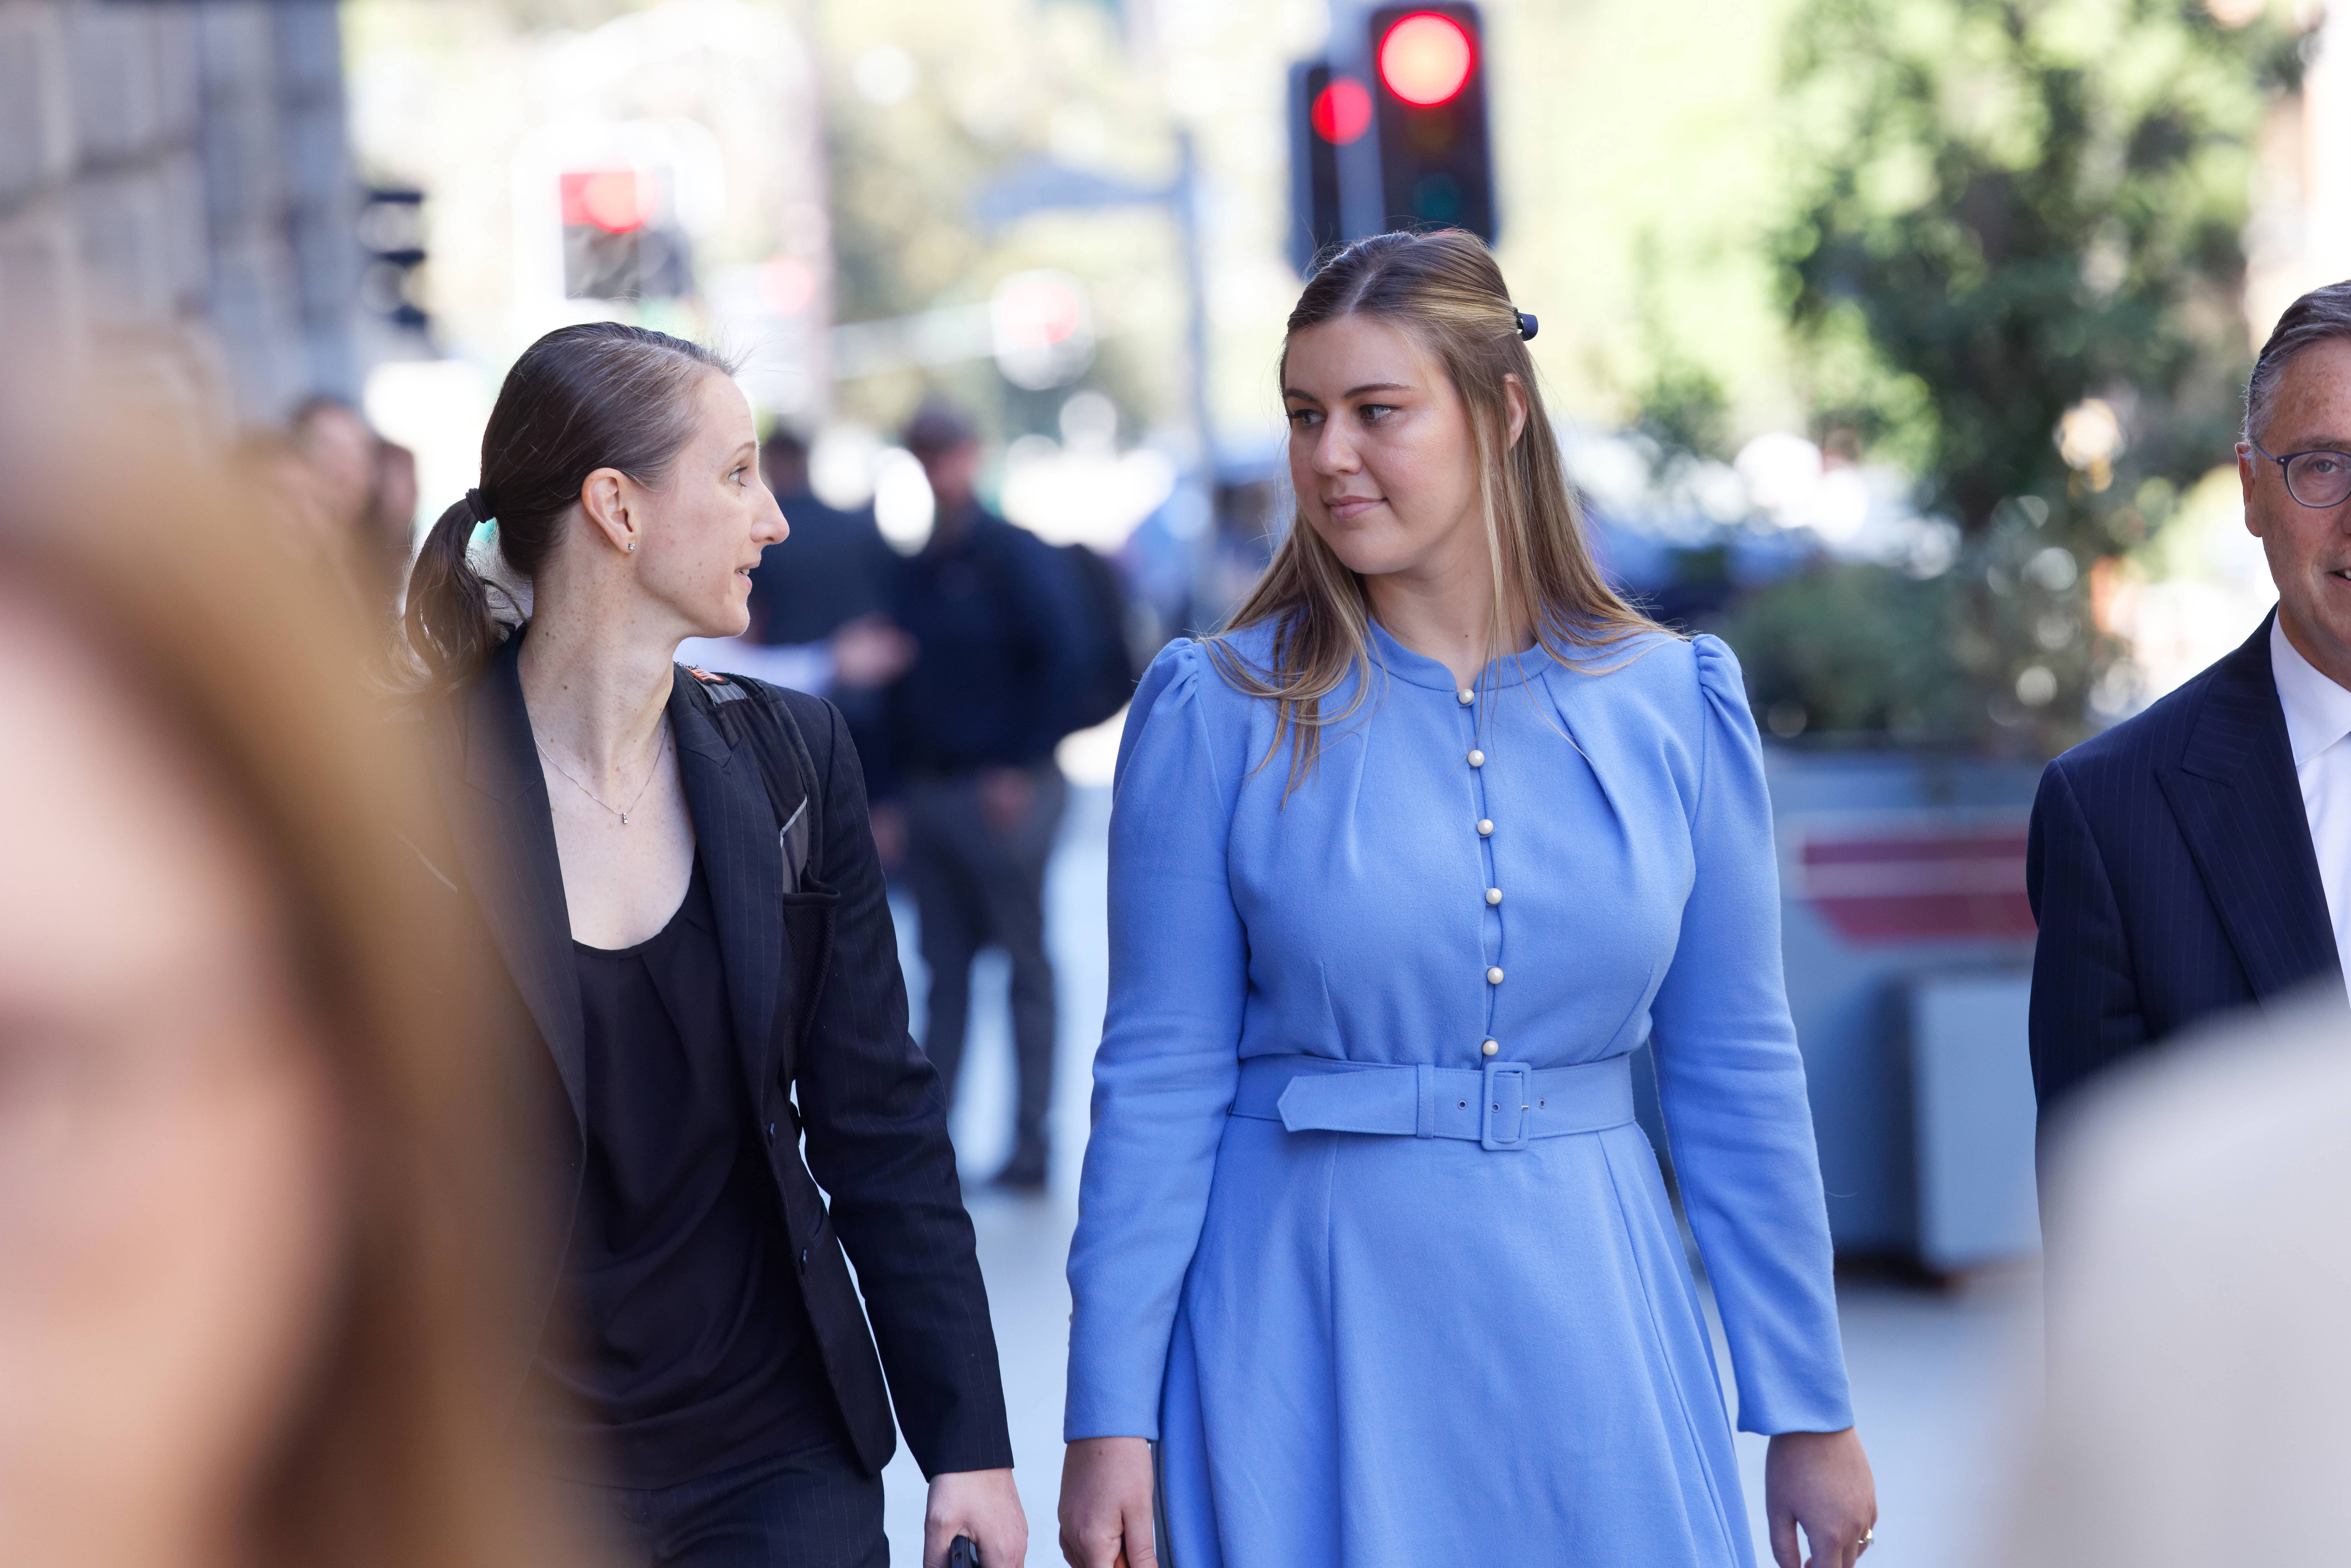 Brittany Higgins (right) with lawyer Theresa Ward arrives at the Perth Supreme Court 